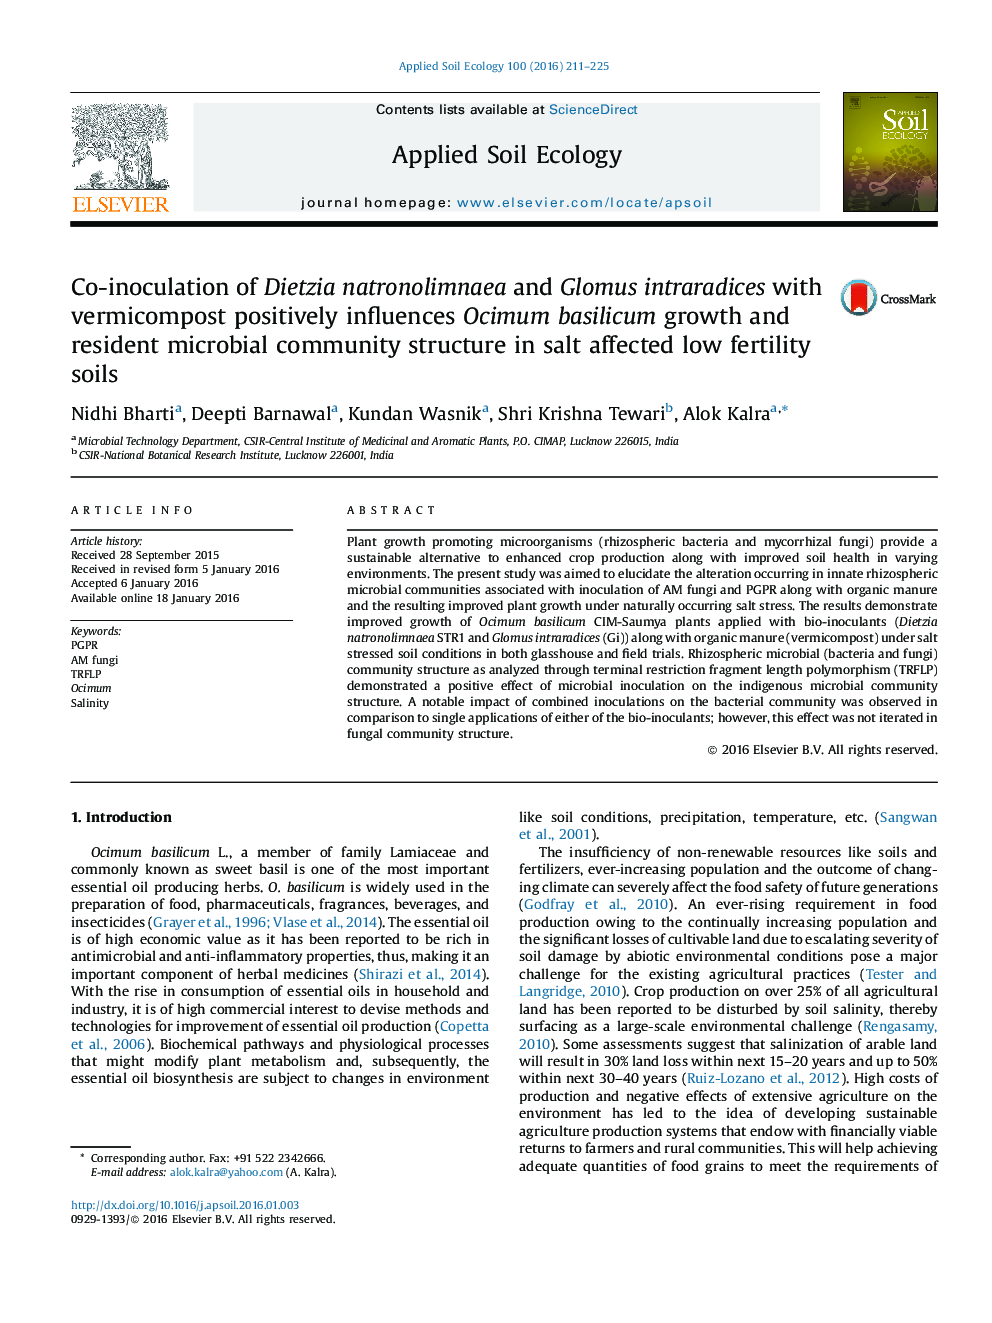 Co-inoculation of Dietzia natronolimnaea and Glomus intraradices with vermicompost positively influences Ocimum basilicum growth and resident microbial community structure in salt affected low fertility soils